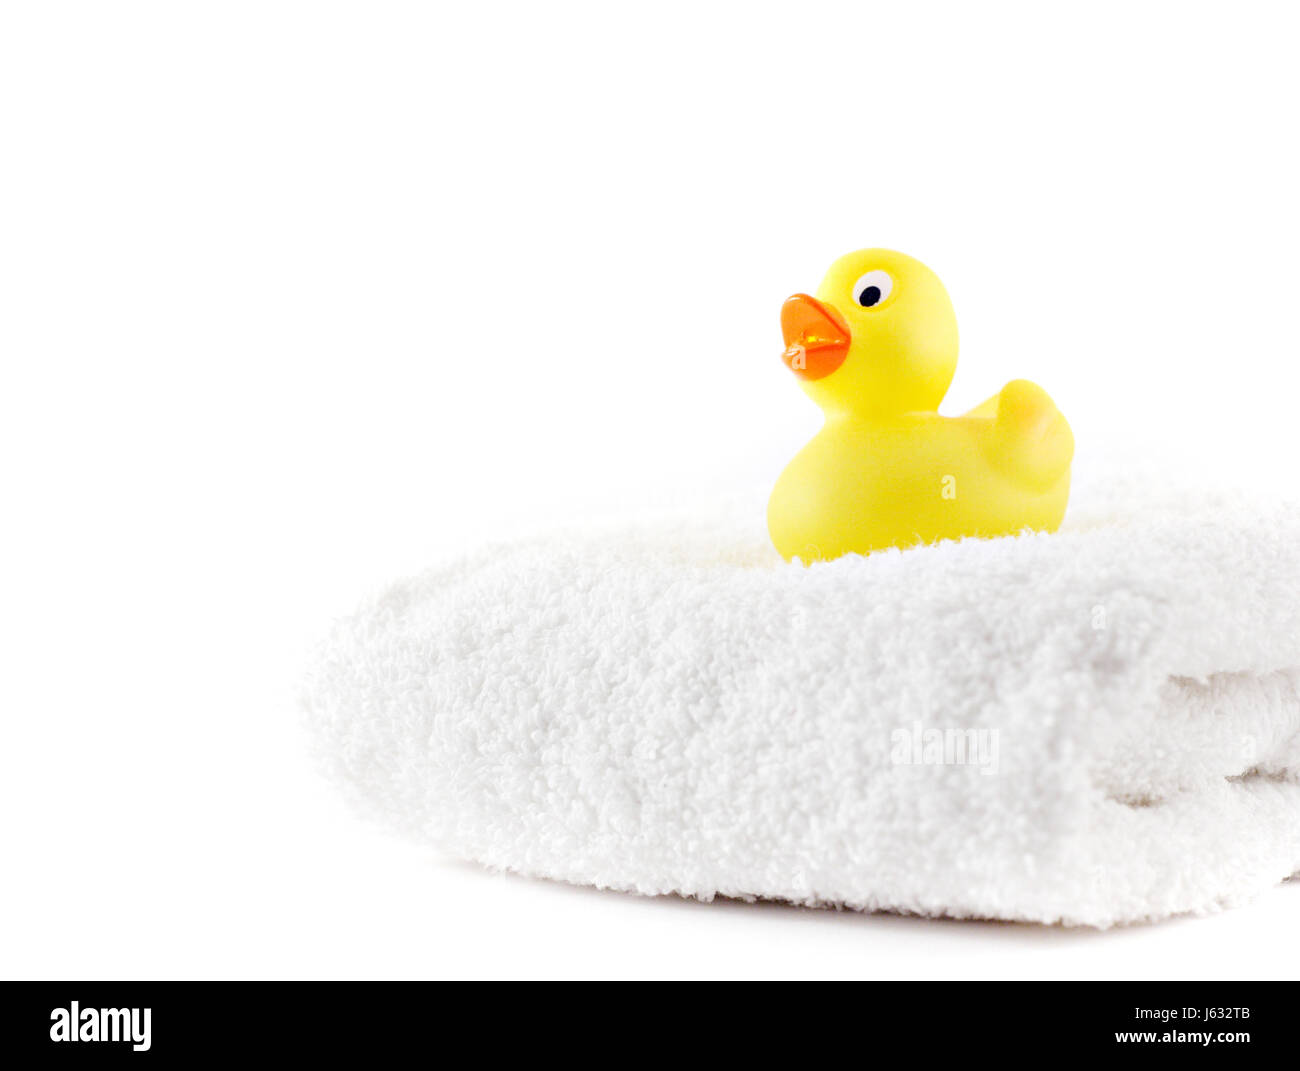 Squeaker duck on towel Banque D'Images